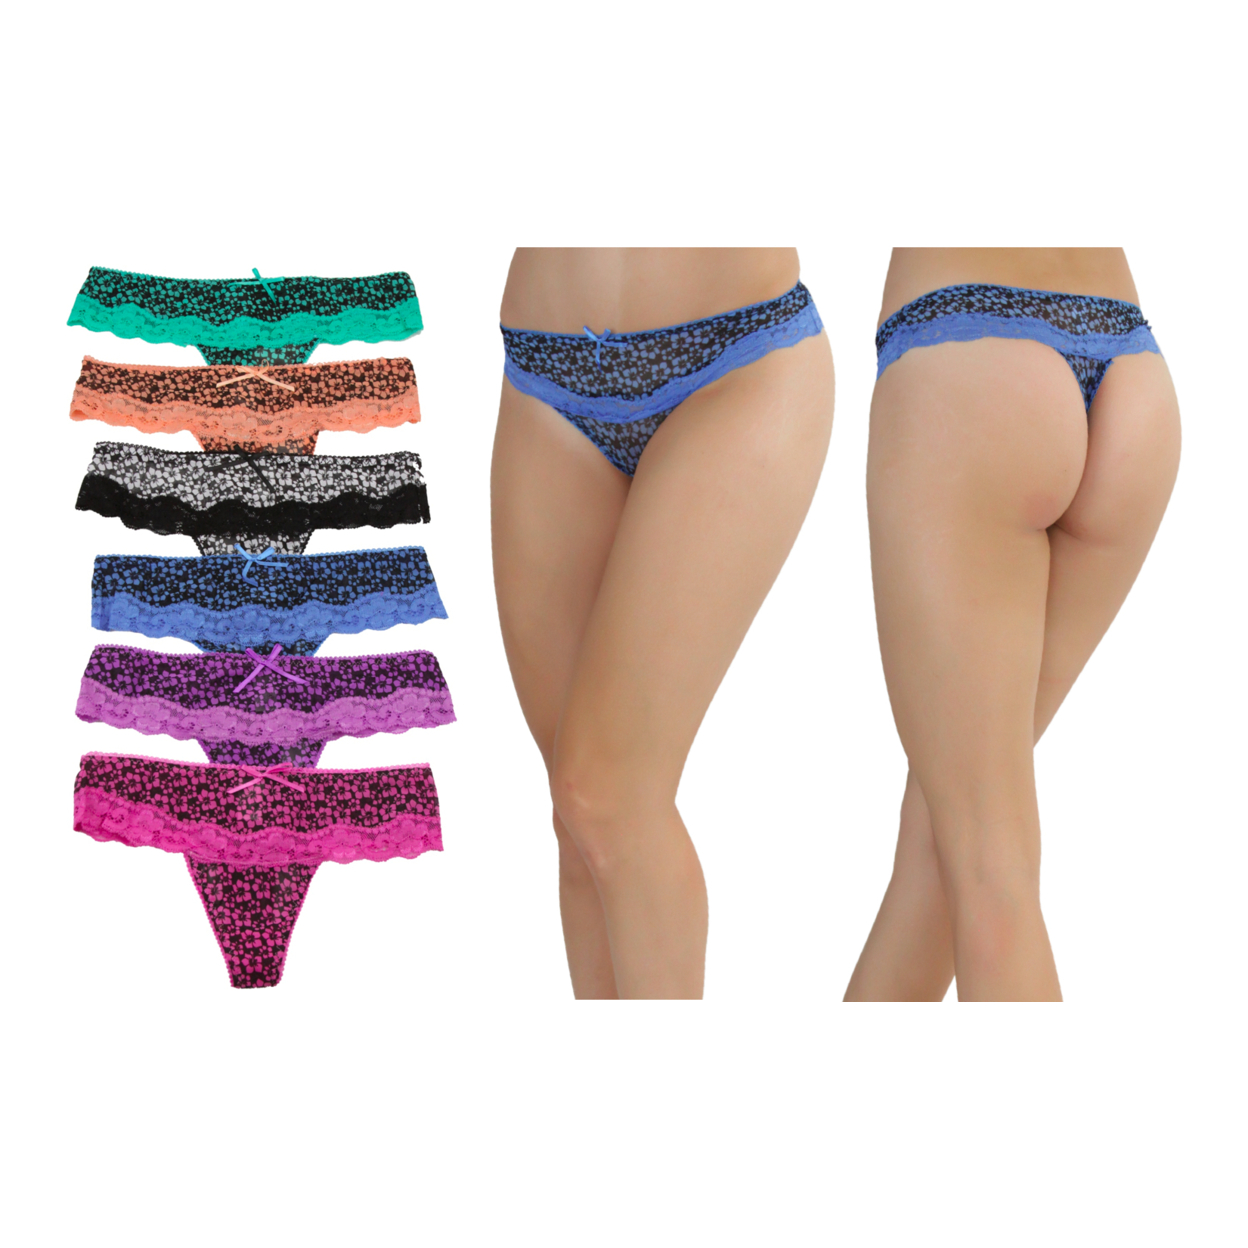 Tiny Daisy Lace Trim Thongs 6-Pack - S